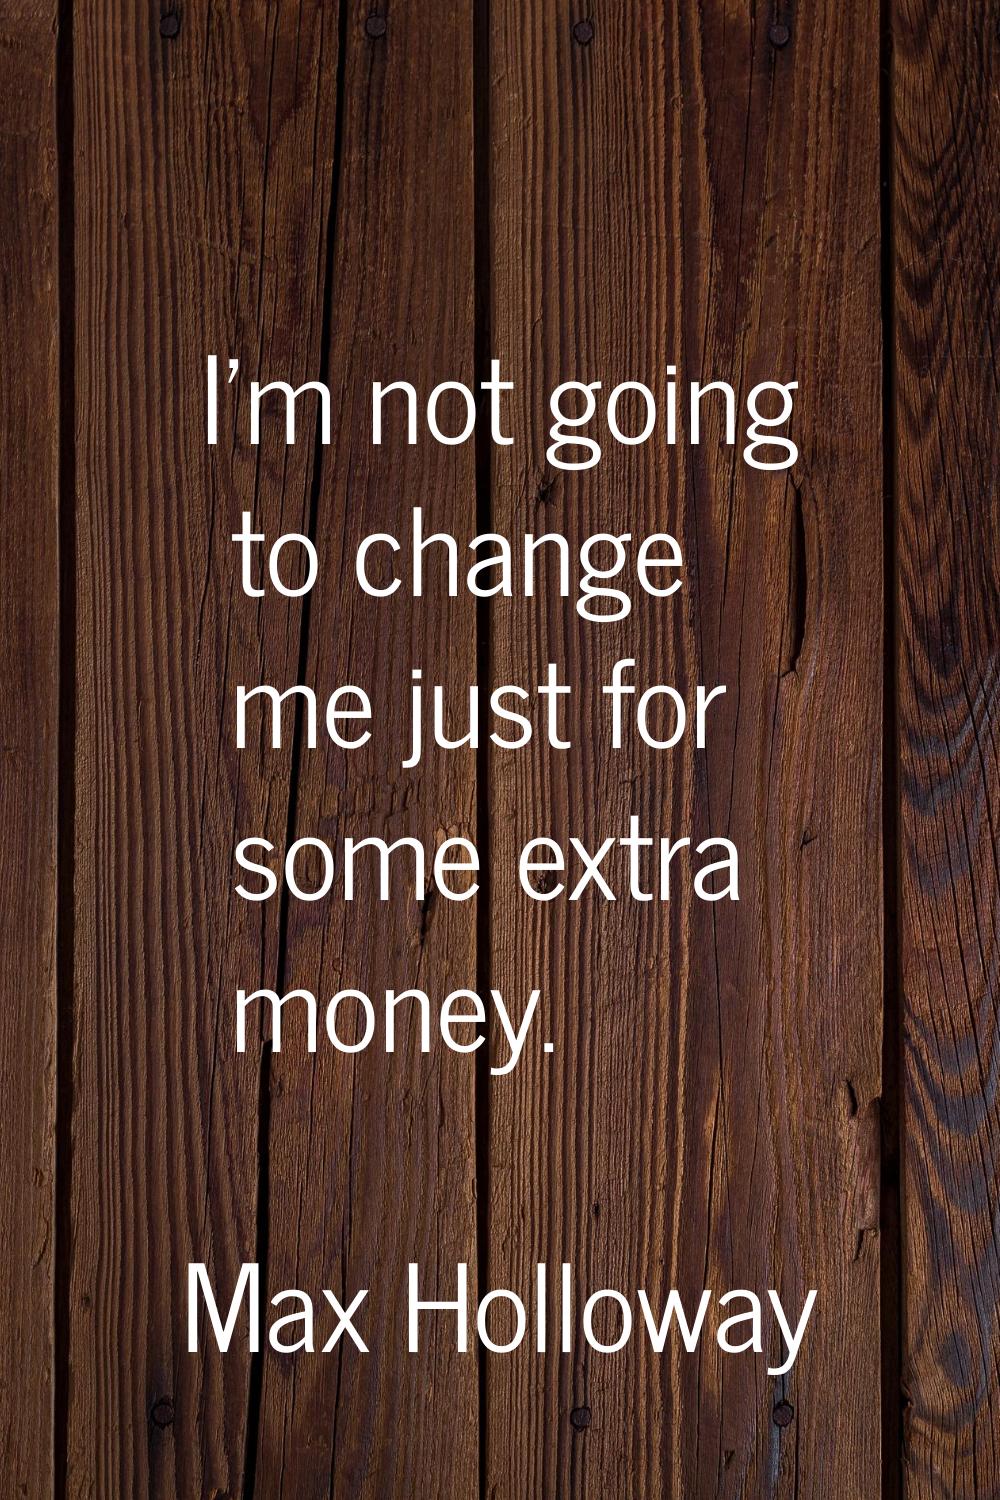 I'm not going to change me just for some extra money.